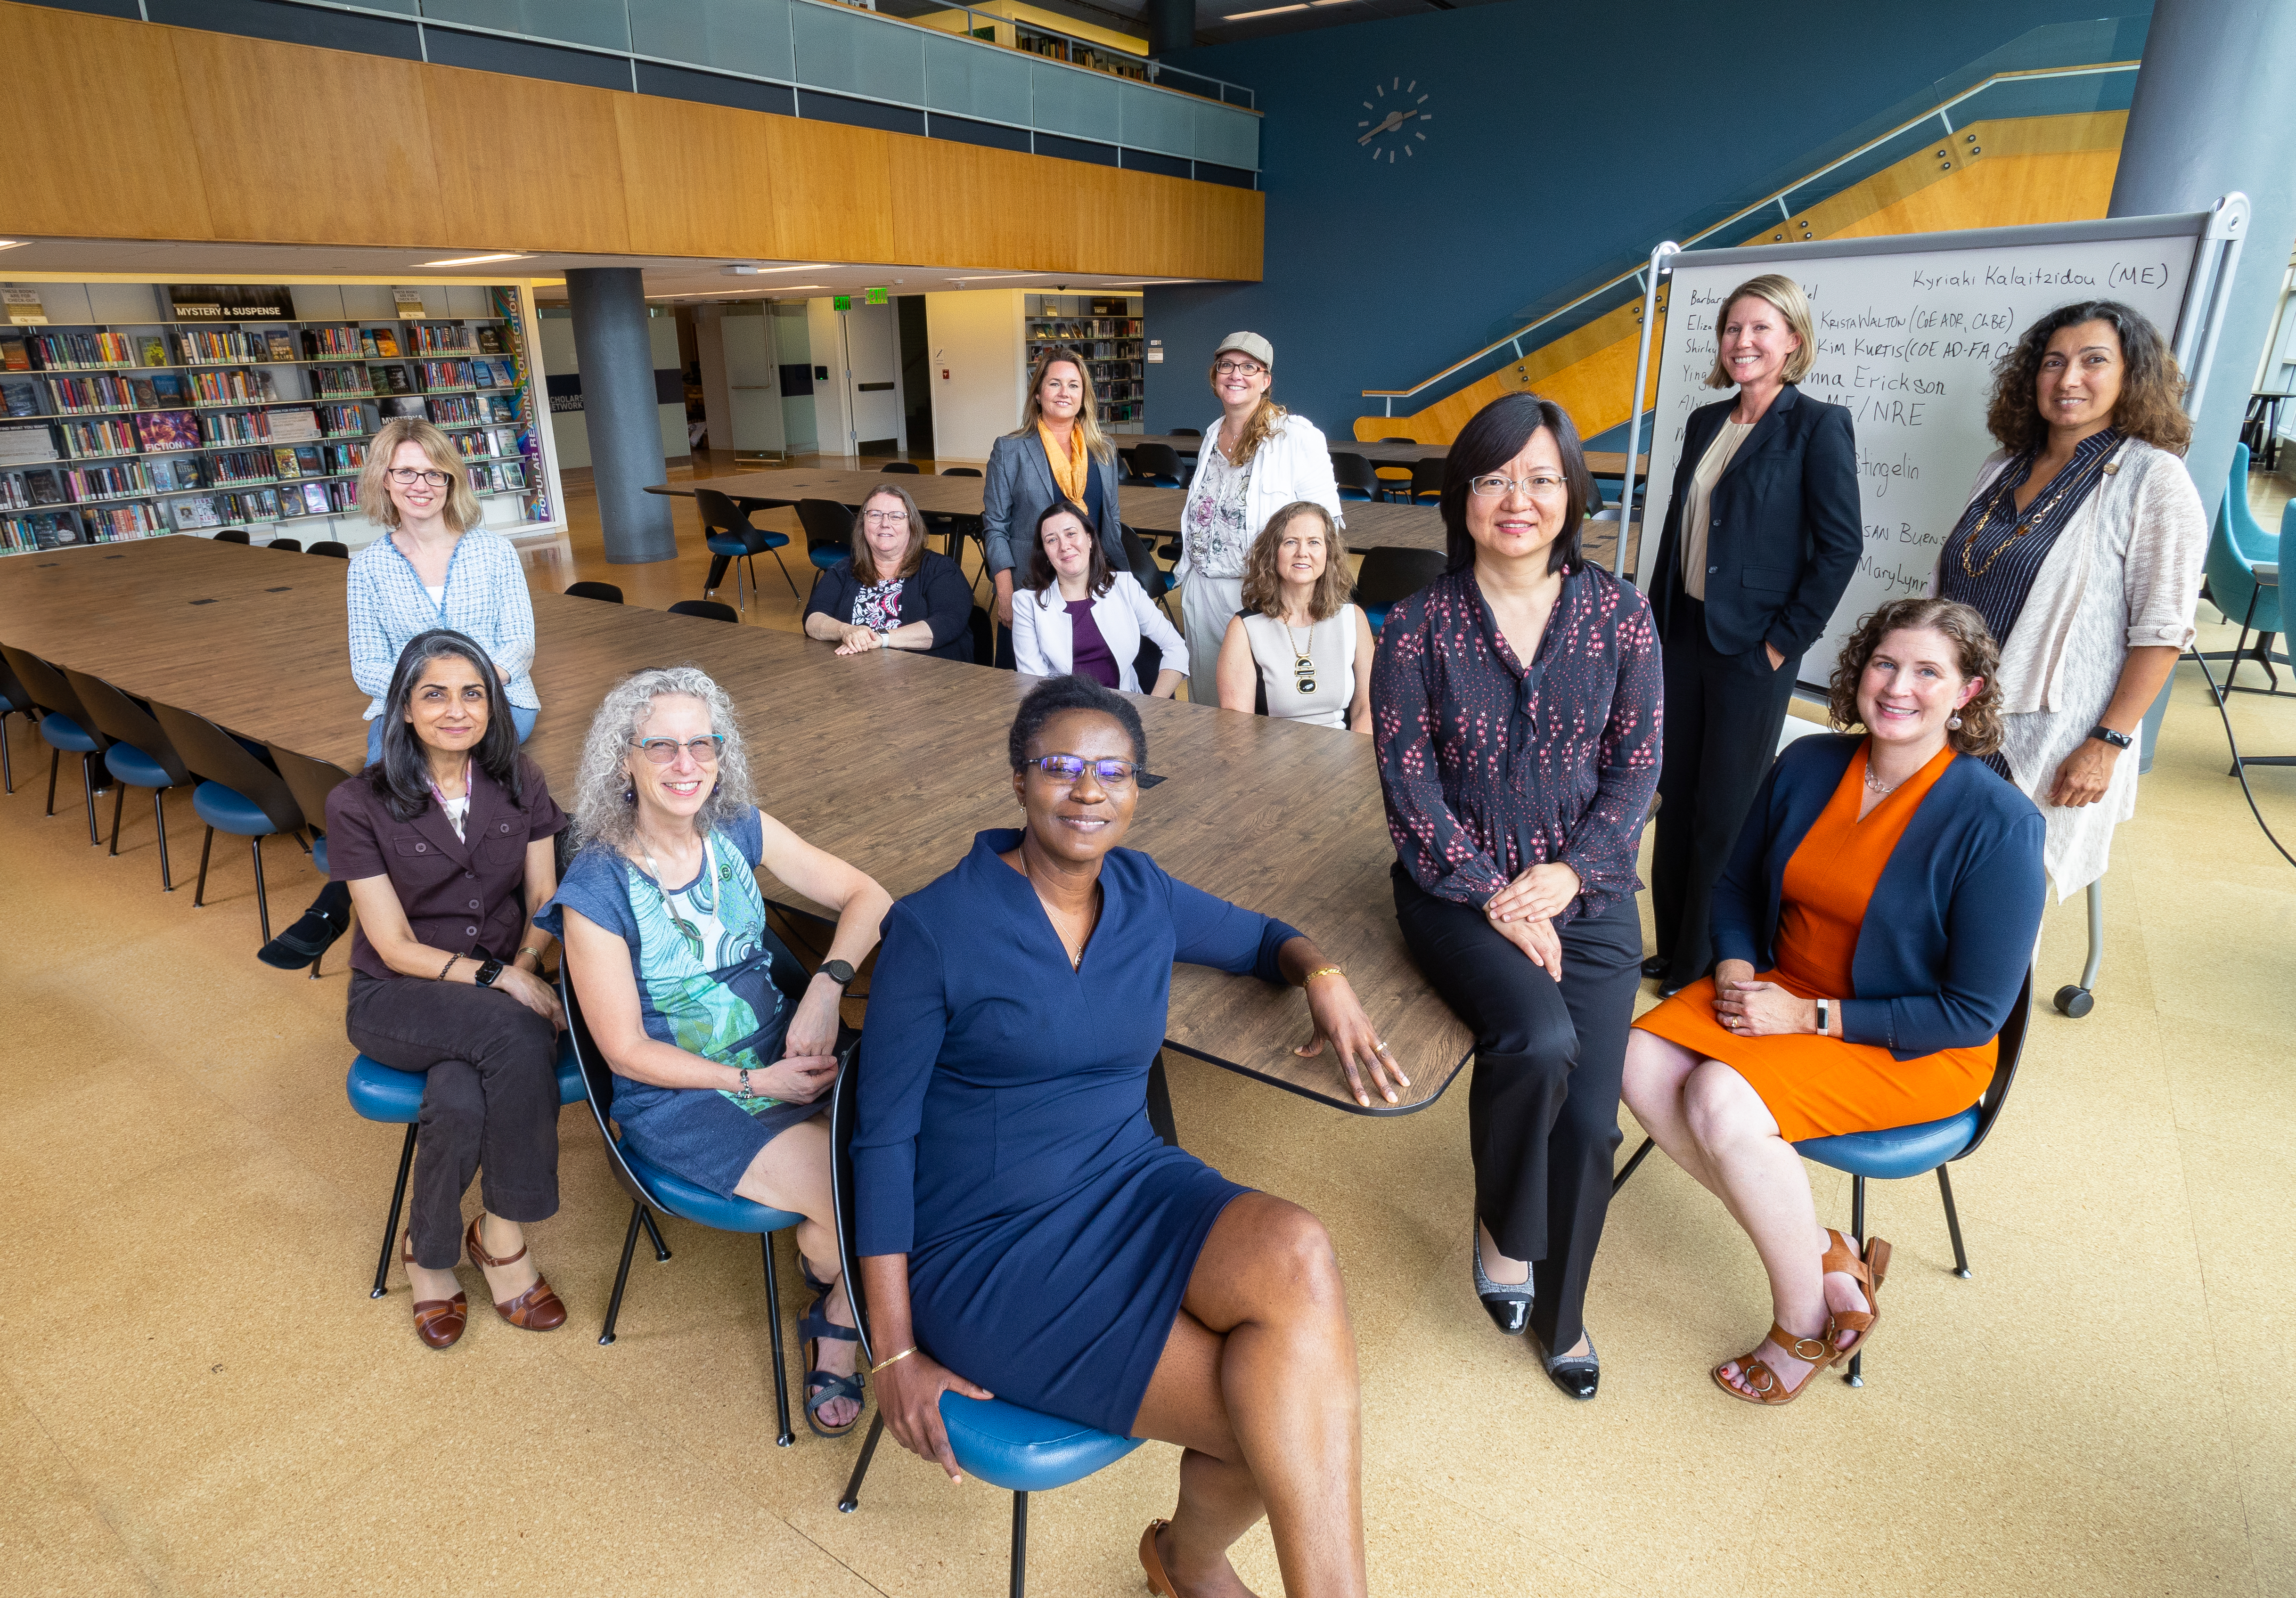 A record 14 women serve in administrative leadership roles in the College of Engineering in 2023. (Not pictured: Lauren Stewart, who was appointed interim associate chair in the School of Civil and Environmental Engineering after the photo.)
